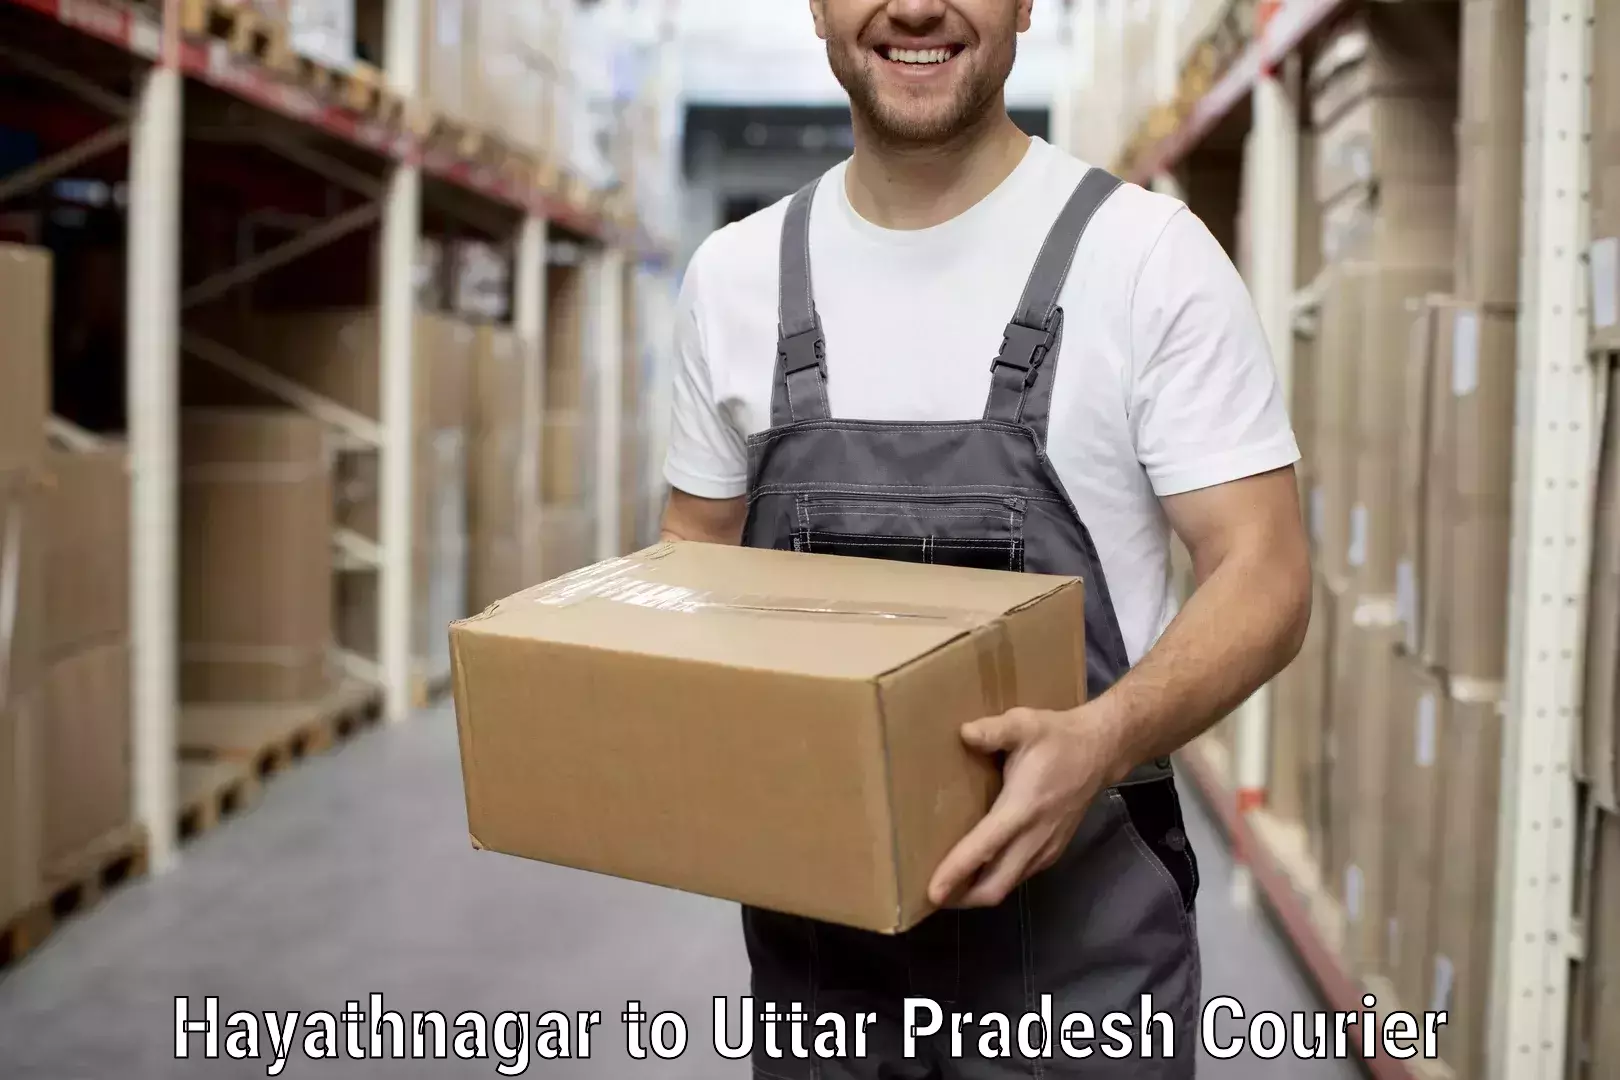 Professional relocation services Hayathnagar to Rath